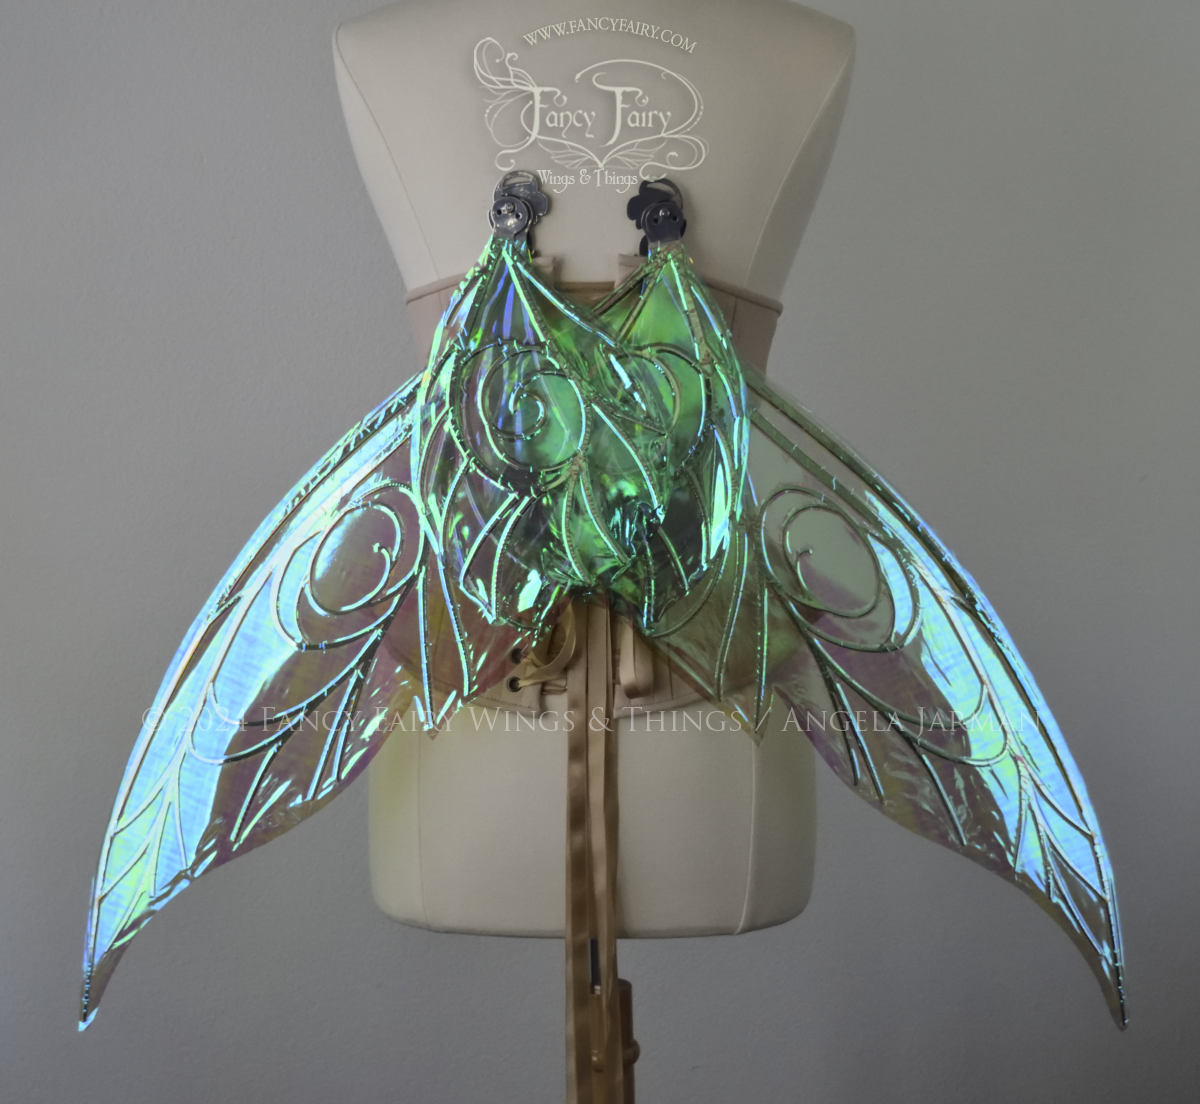 Back view of green iridescent Tinker Bell inspired fairy wings with swirly silver veins, displayed on a dress form in resting position